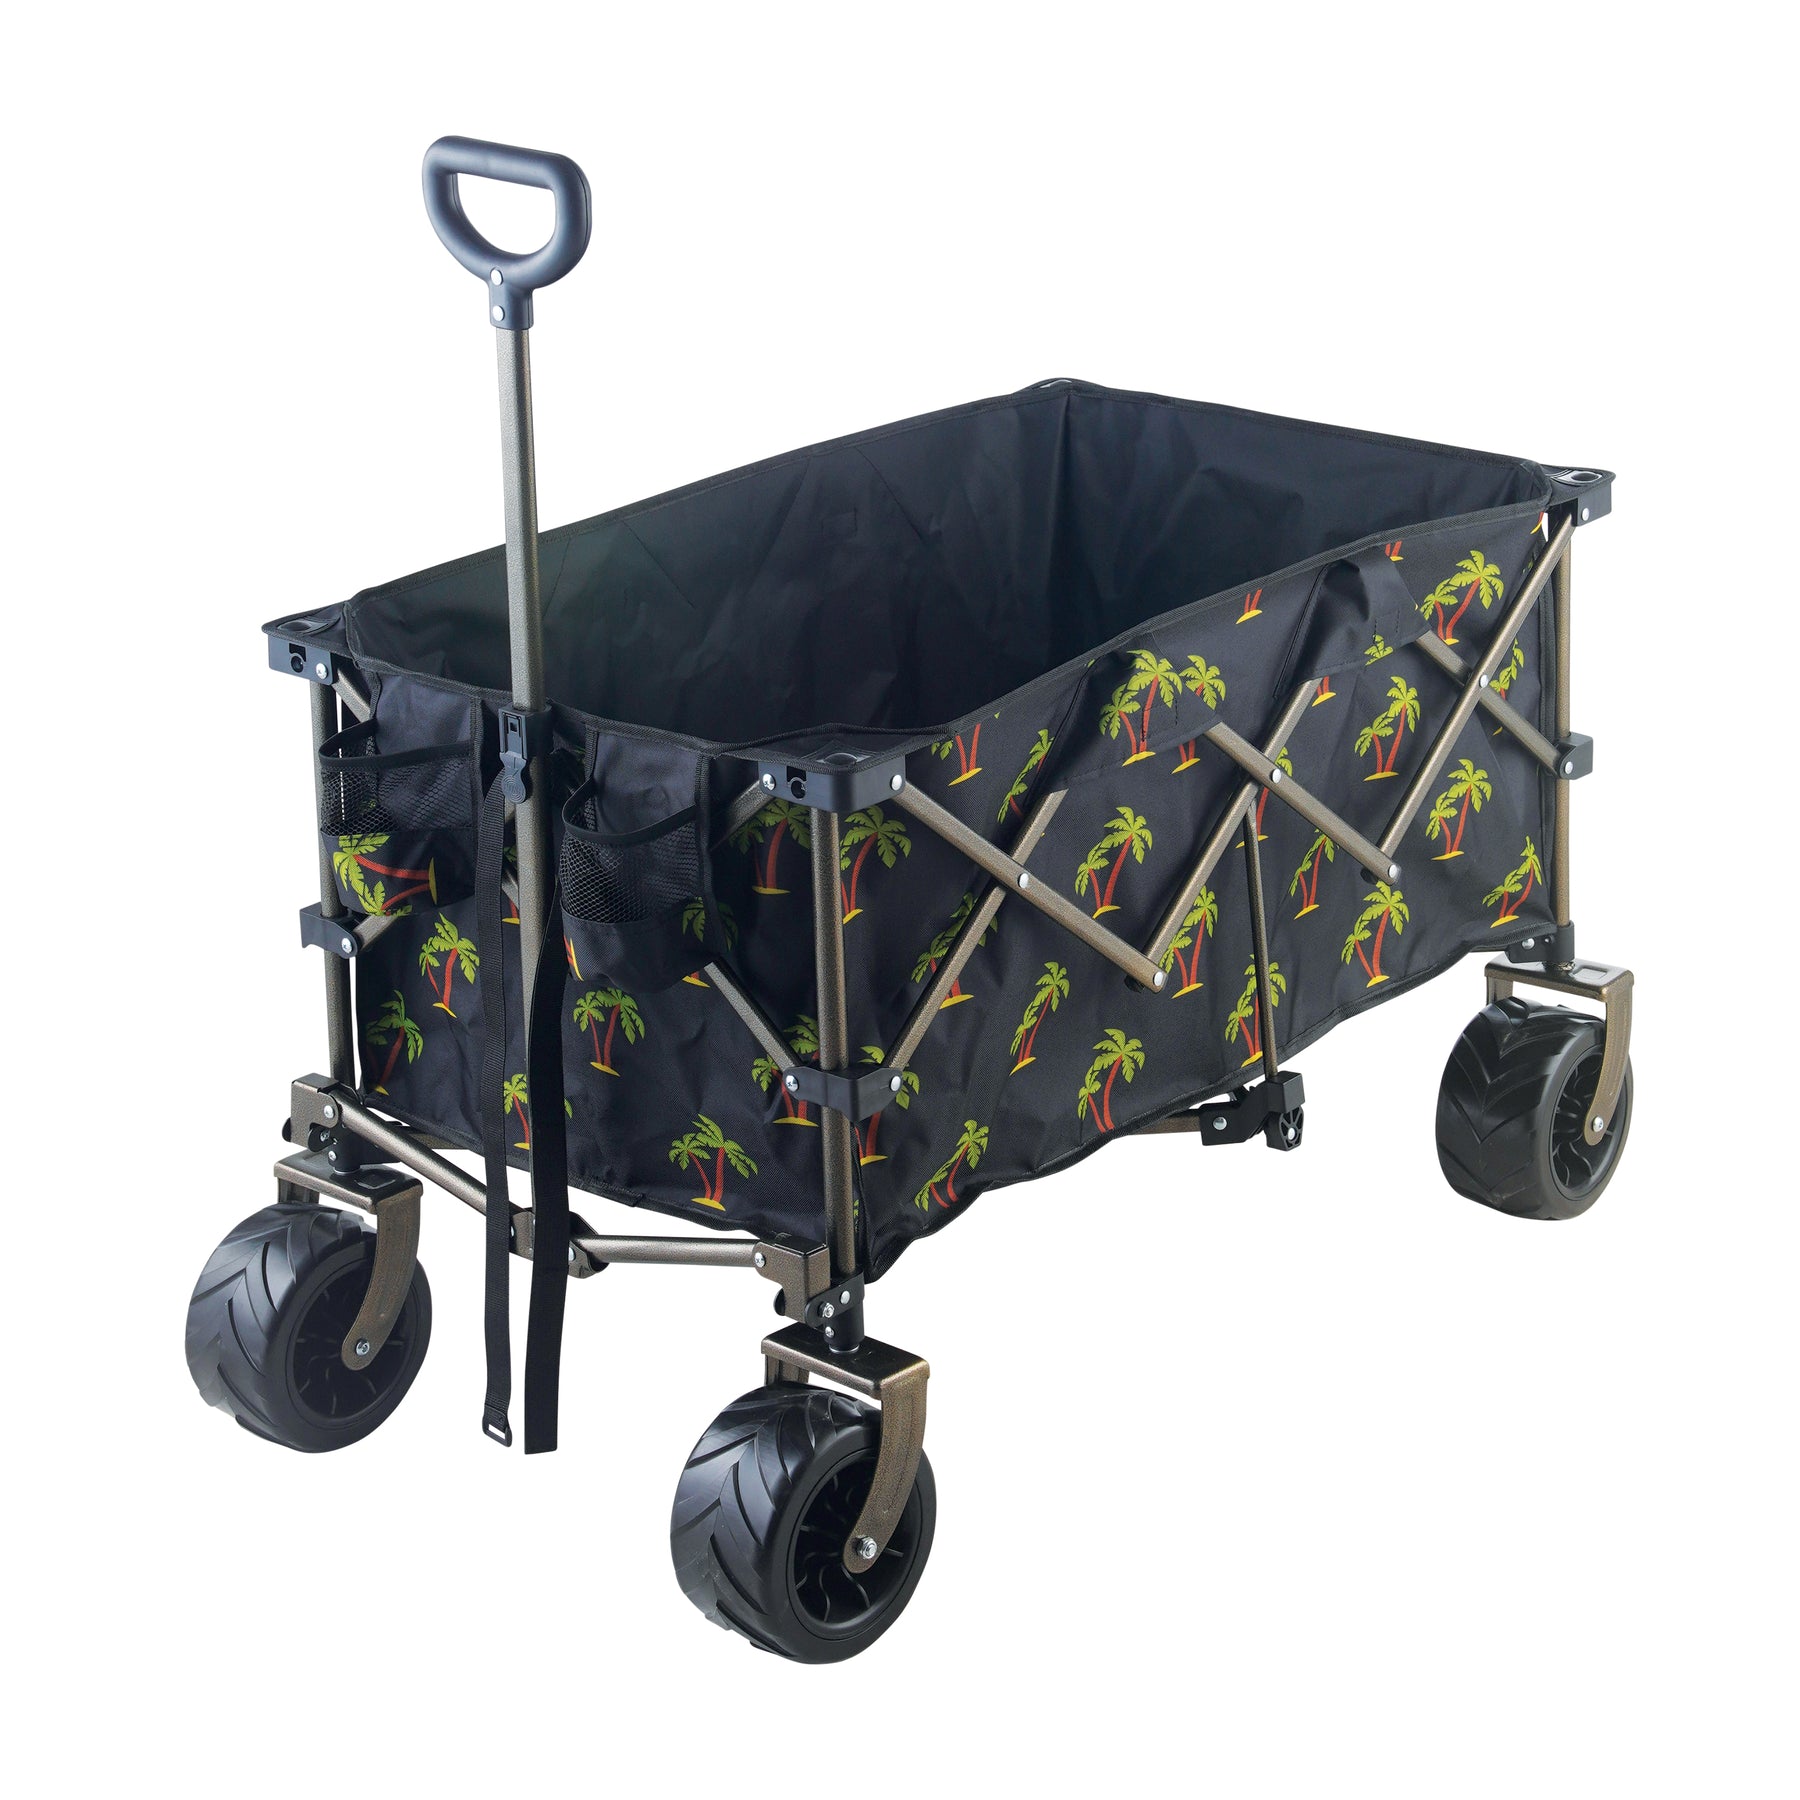 Bliss Hammocks 36-inch Collapsible Garden Cart/Beach Wagon in the Palm Tree variation.